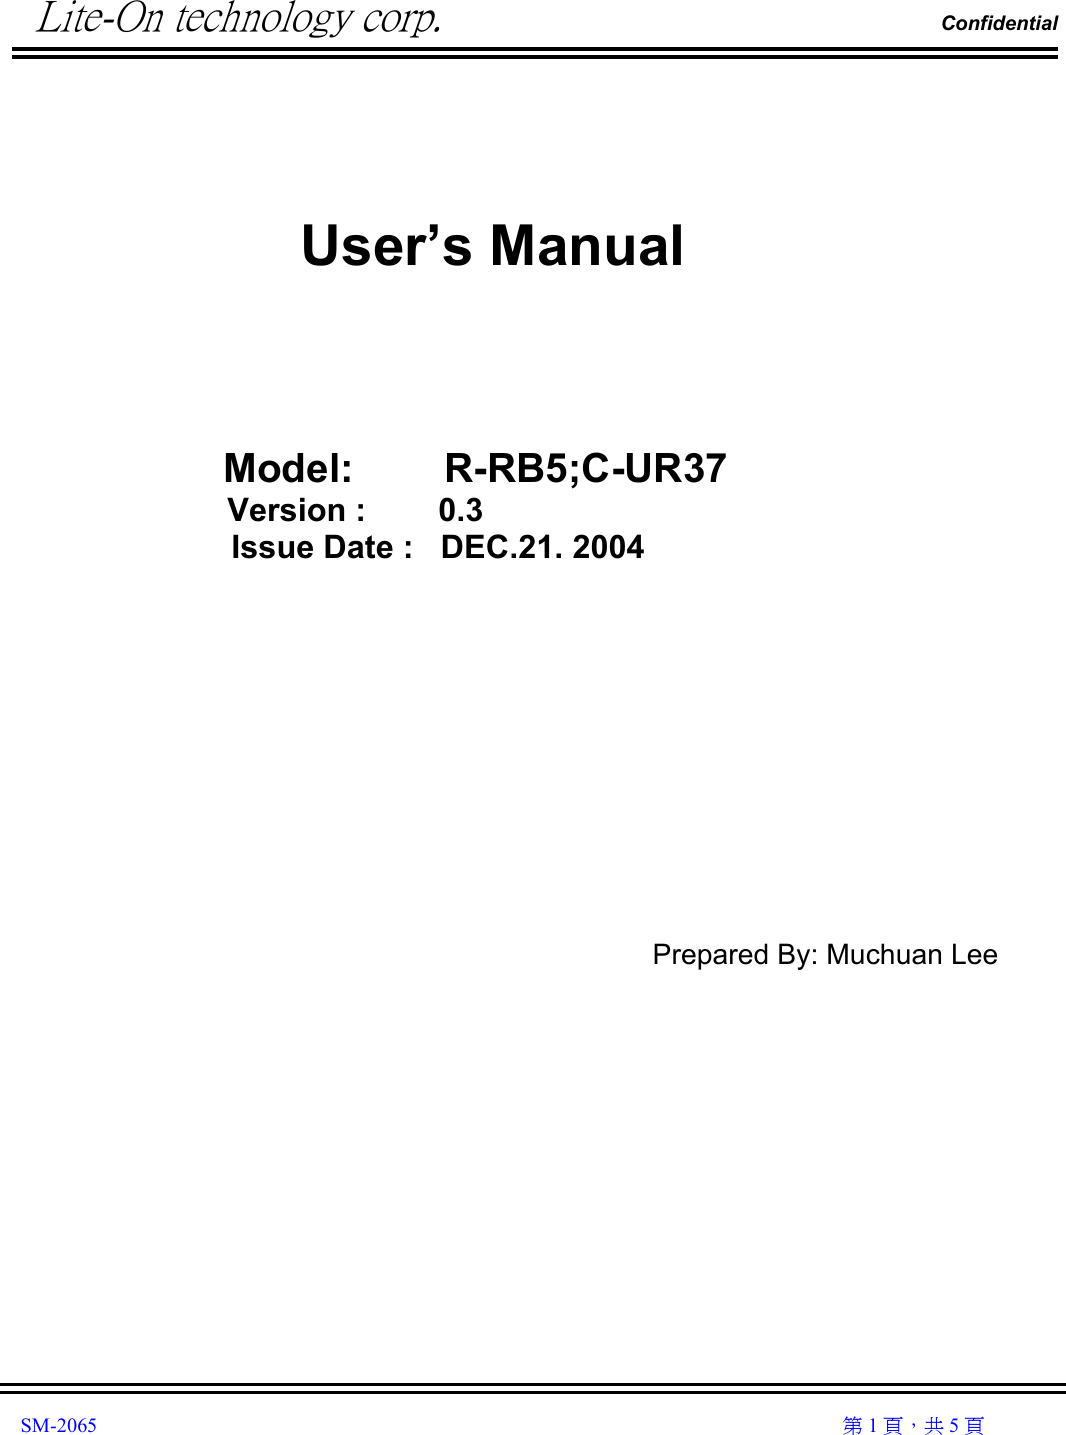          Lite-On technology corp.                                                                Confidential               SM-2065                                                                                                                                                  第 1 頁，共 5 頁                       User’s Manual     Model:        R-RB5;C-UR37 Version :        0.3Issue Date :   DEC.21. 2004          Prepared By: Muchuan Lee               